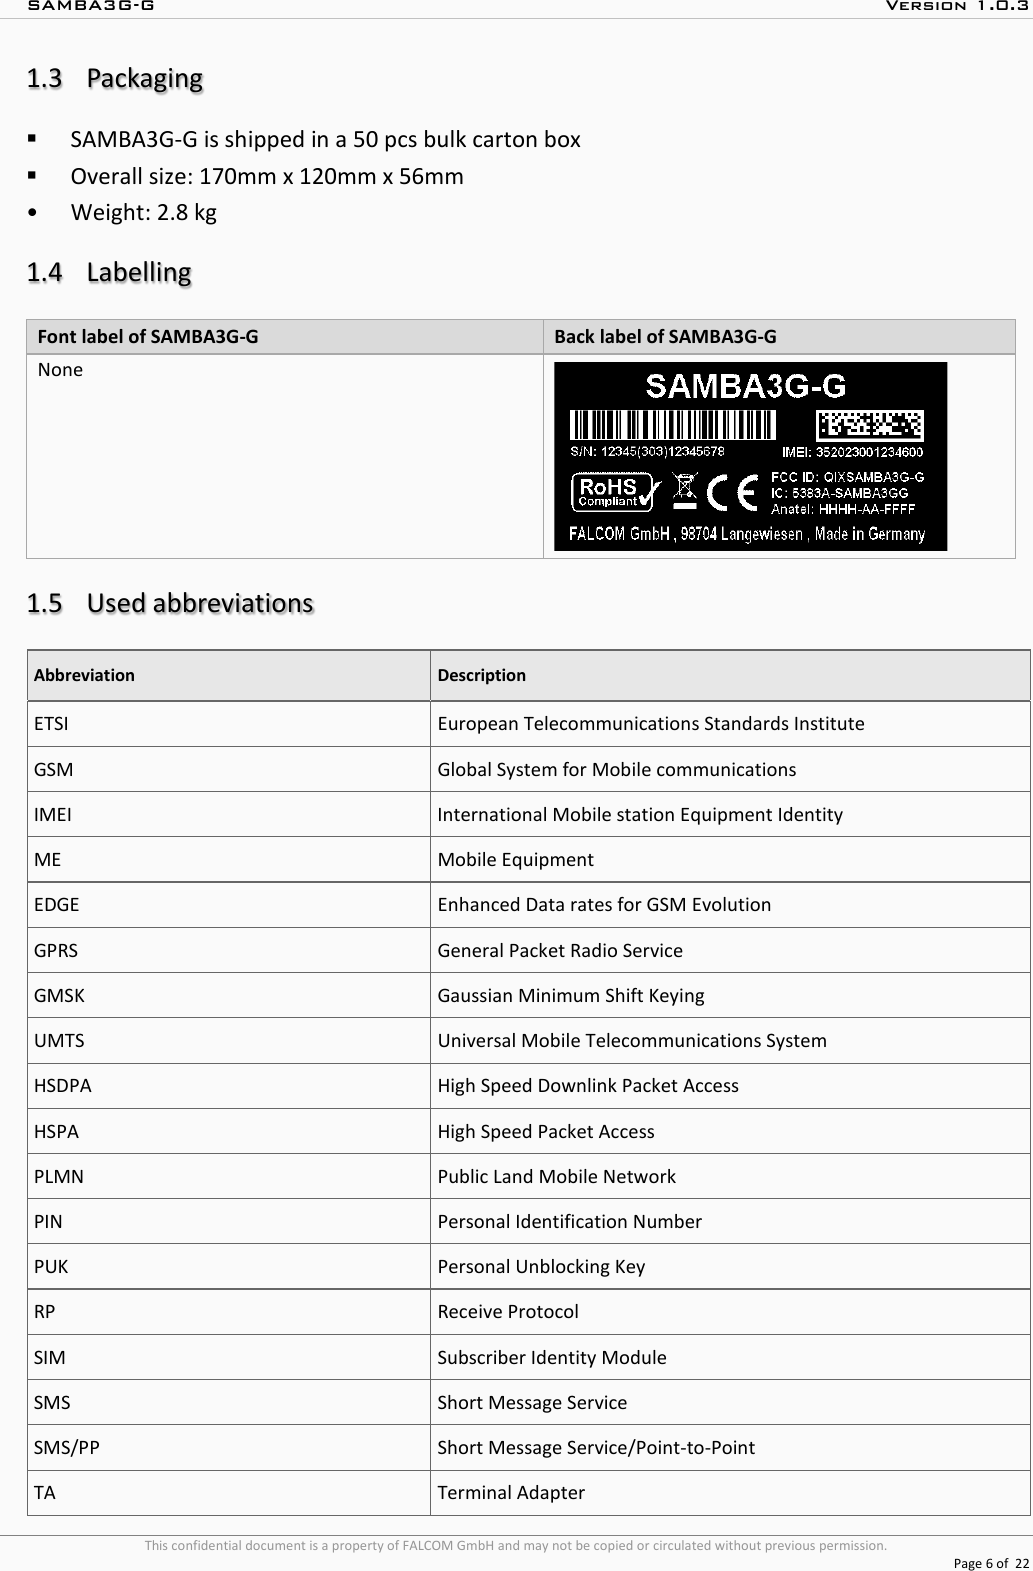 SAMBA3G-G  Version 1.0.3   This confidential document is a property of FALCOM GmbH and may not be copied or circulated without previous permission.  Page 6 of  22  1.3 Packaging  SAMBA3G-G is shipped in a 50 pcs bulk carton box   Overall size: 170mm x 120mm x 56mm  • Weight: 2.8 kg   1.4 Labelling Font label of SAMBA3G-G  Back label of SAMBA3G-G    None   1.5 Used abbreviations Abbreviation Description ETSI European Telecommunications Standards Institute GSM Global System for Mobile communications IMEI  International Mobile station Equipment Identity ME Mobile Equipment EDGE Enhanced Data rates for GSM Evolution GPRS General Packet Radio Service GMSK Gaussian Minimum Shift Keying UMTS Universal Mobile Telecommunications System HSDPA High Speed Downlink Packet Access HSPA High Speed Packet Access PLMN Public Land Mobile Network PIN Personal Identification Number PUK Personal Unblocking Key RP Receive Protocol SIM Subscriber Identity Module SMS Short Message Service SMS/PP Short Message Service/Point-to-Point TA Terminal Adapter 